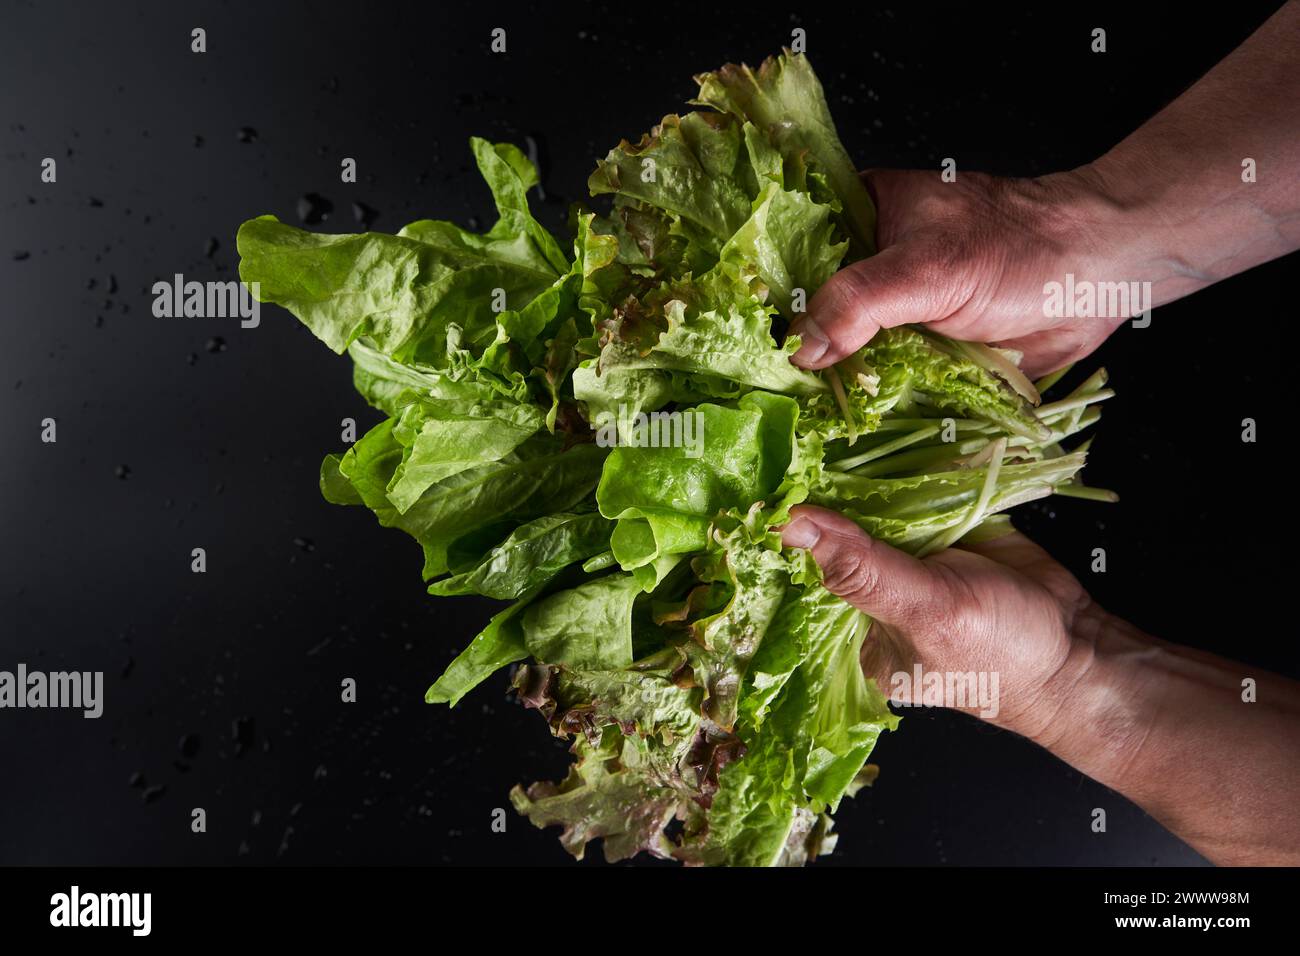 Man's farmer hands holding a bunch of lettuce freshly picked from the garden over black background Stock Photo